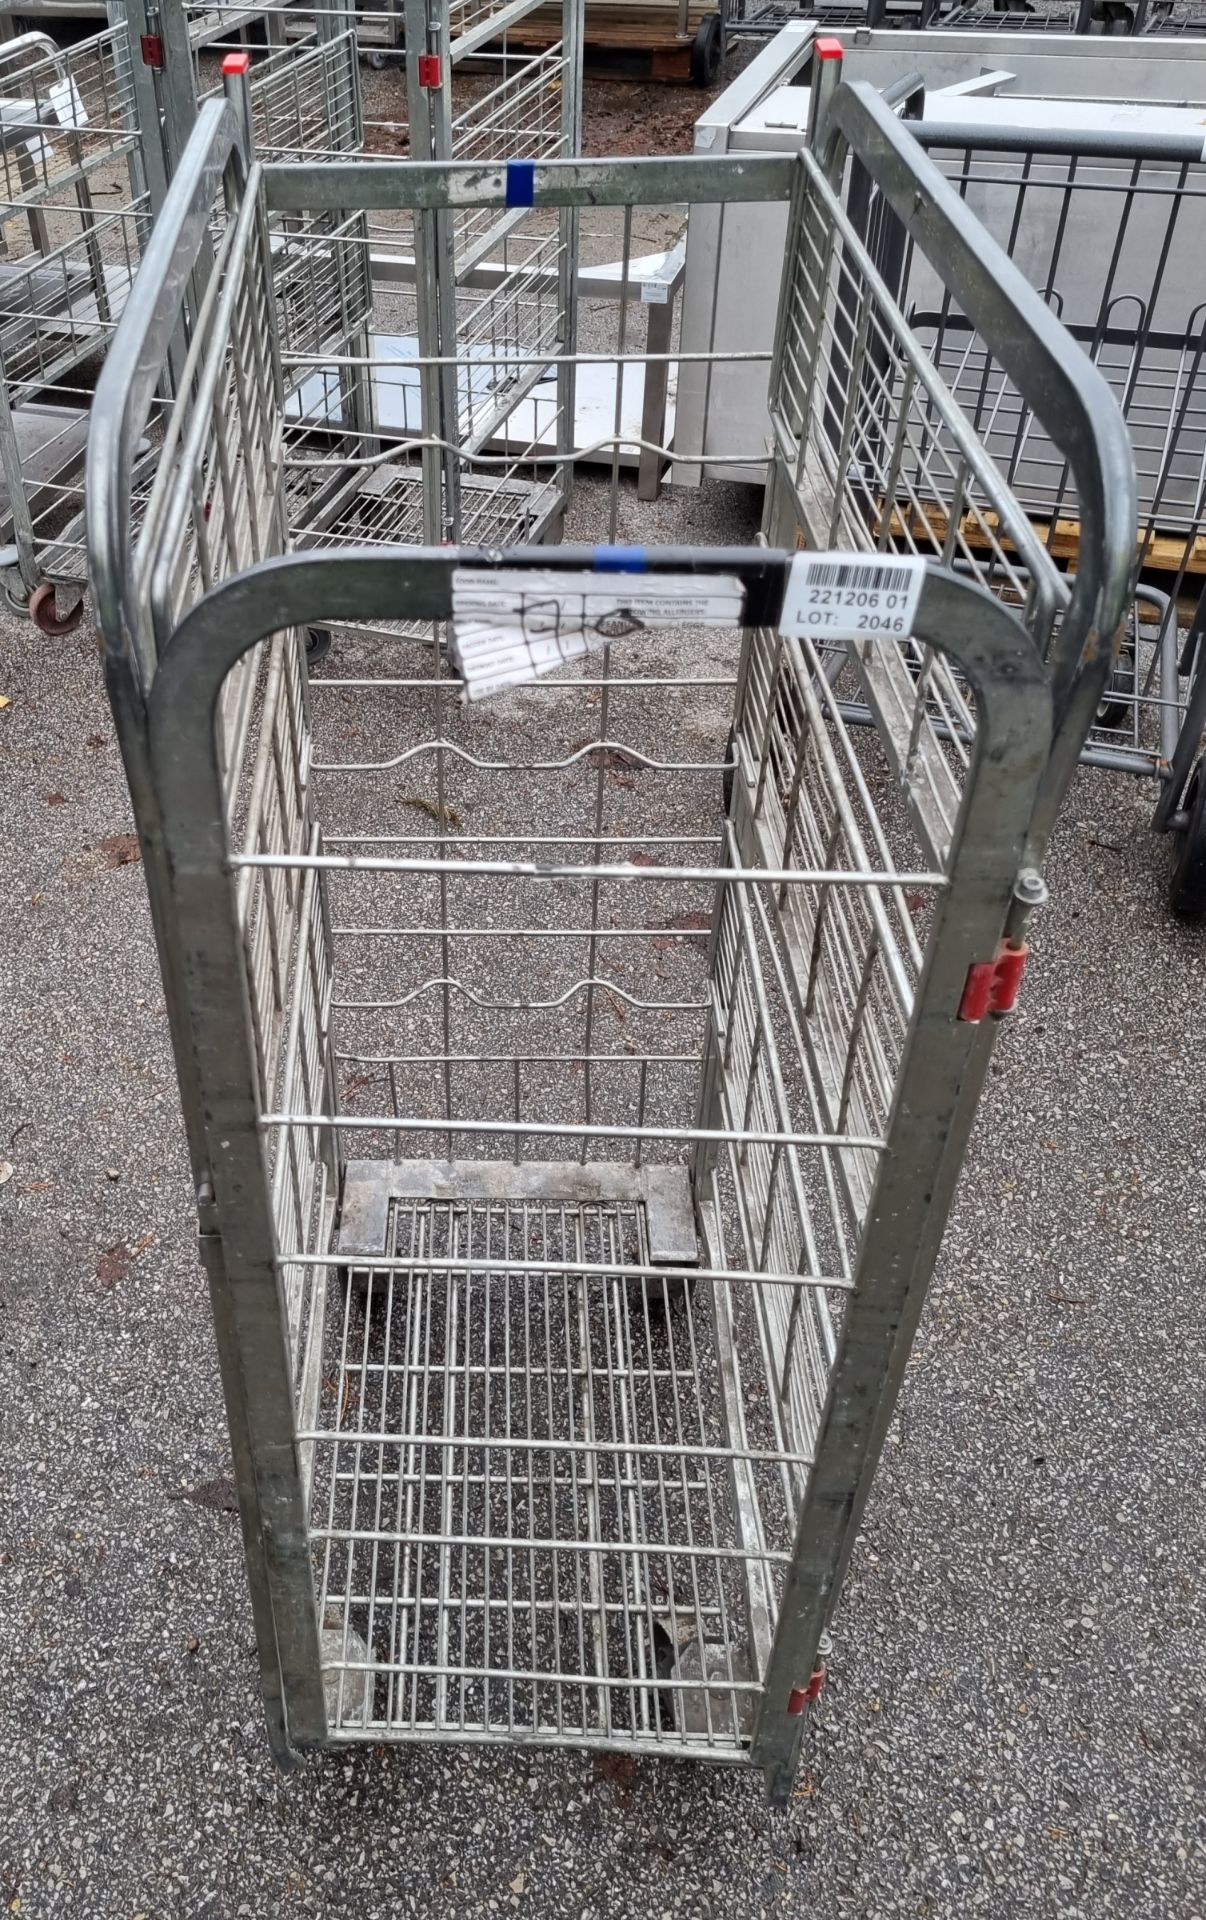 4 sided roll cage milk trolley - 45x65x125cm - Image 3 of 3